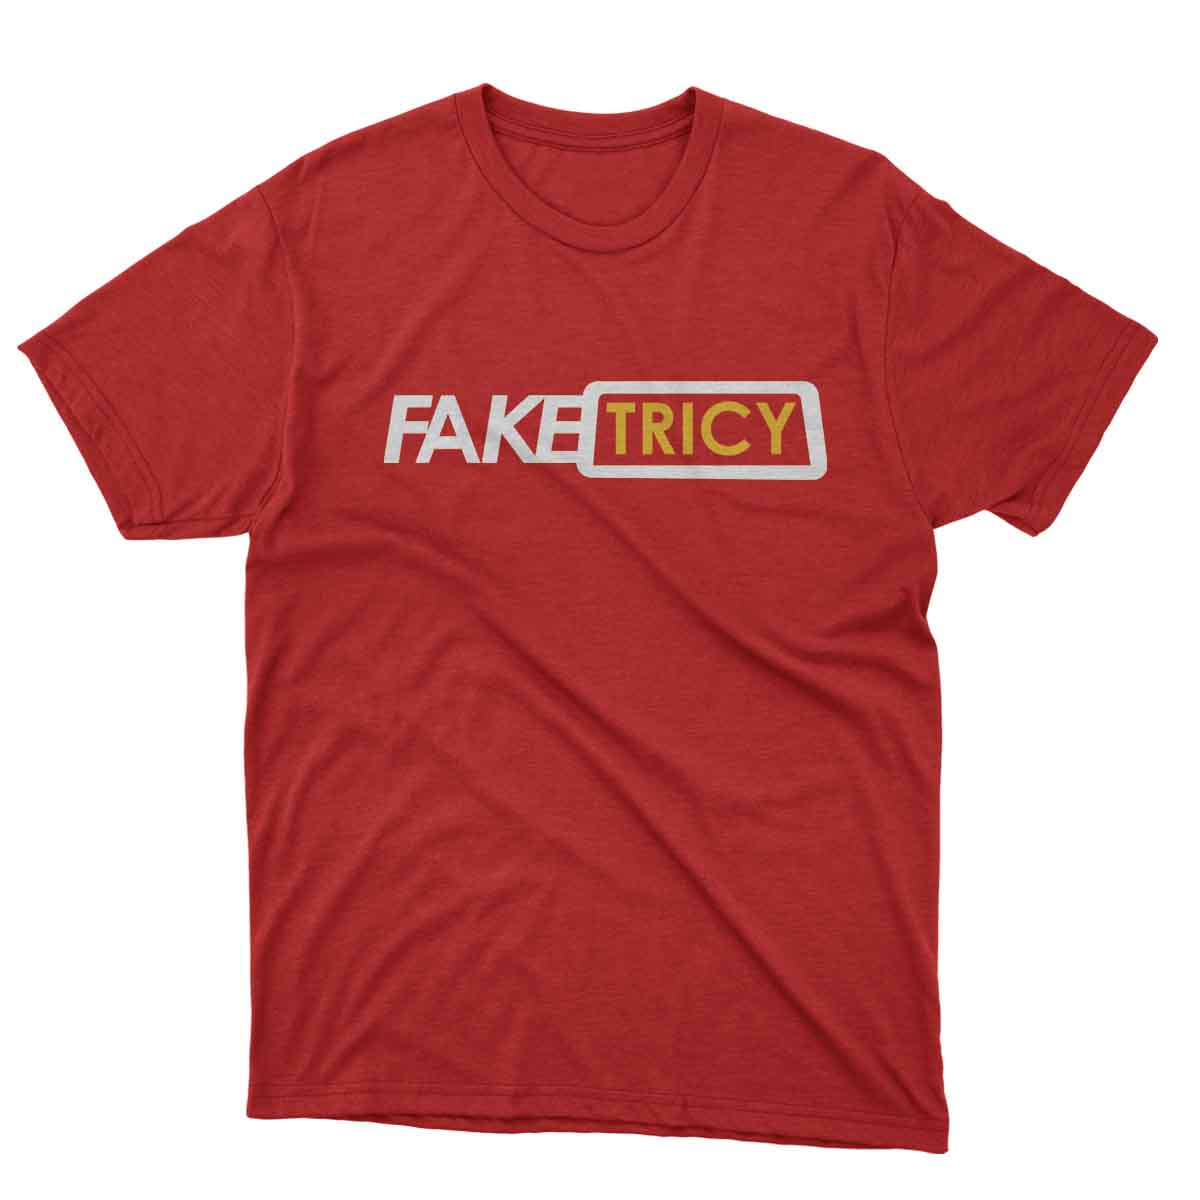 Fake Tricy